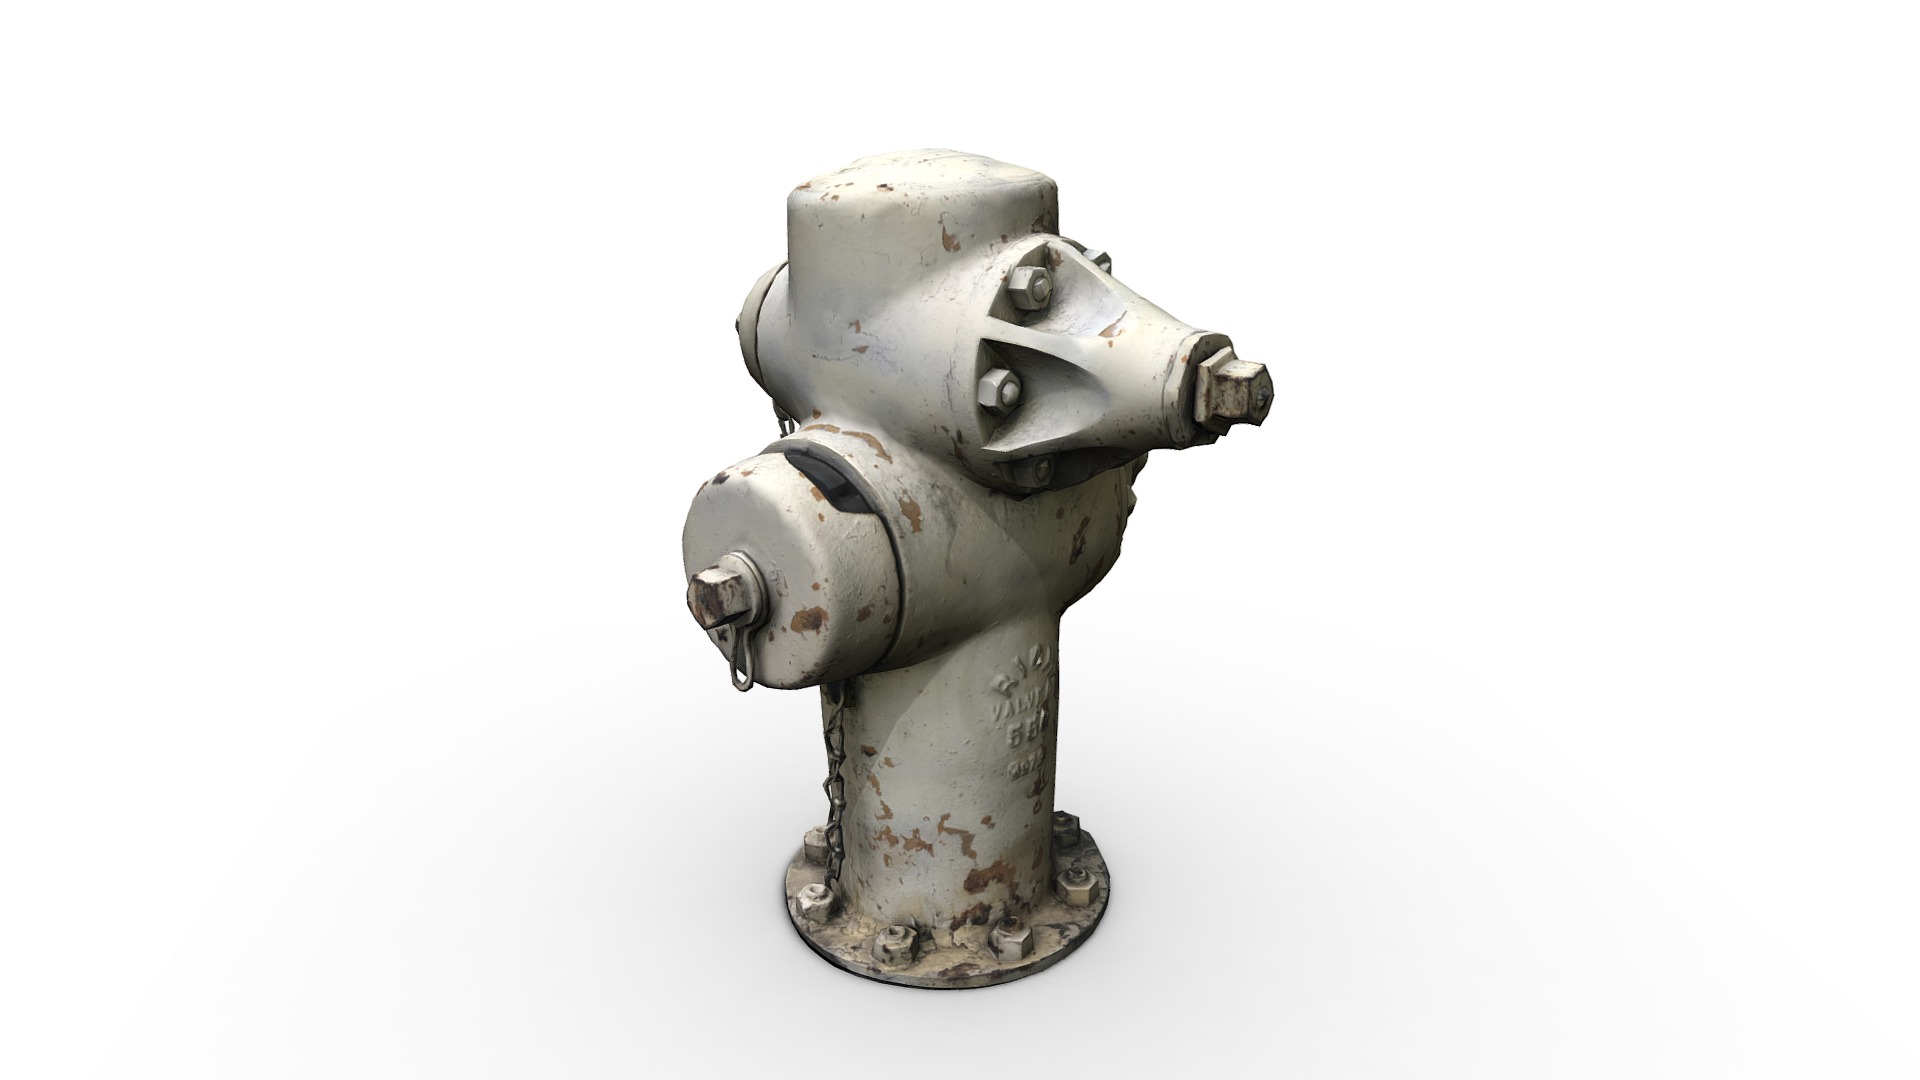 3D model Fire Hydrant (photogrammetry scan) - This is a 3D model of the Fire Hydrant (photogrammetry scan). The 3D model is about a silver fire hydrant.